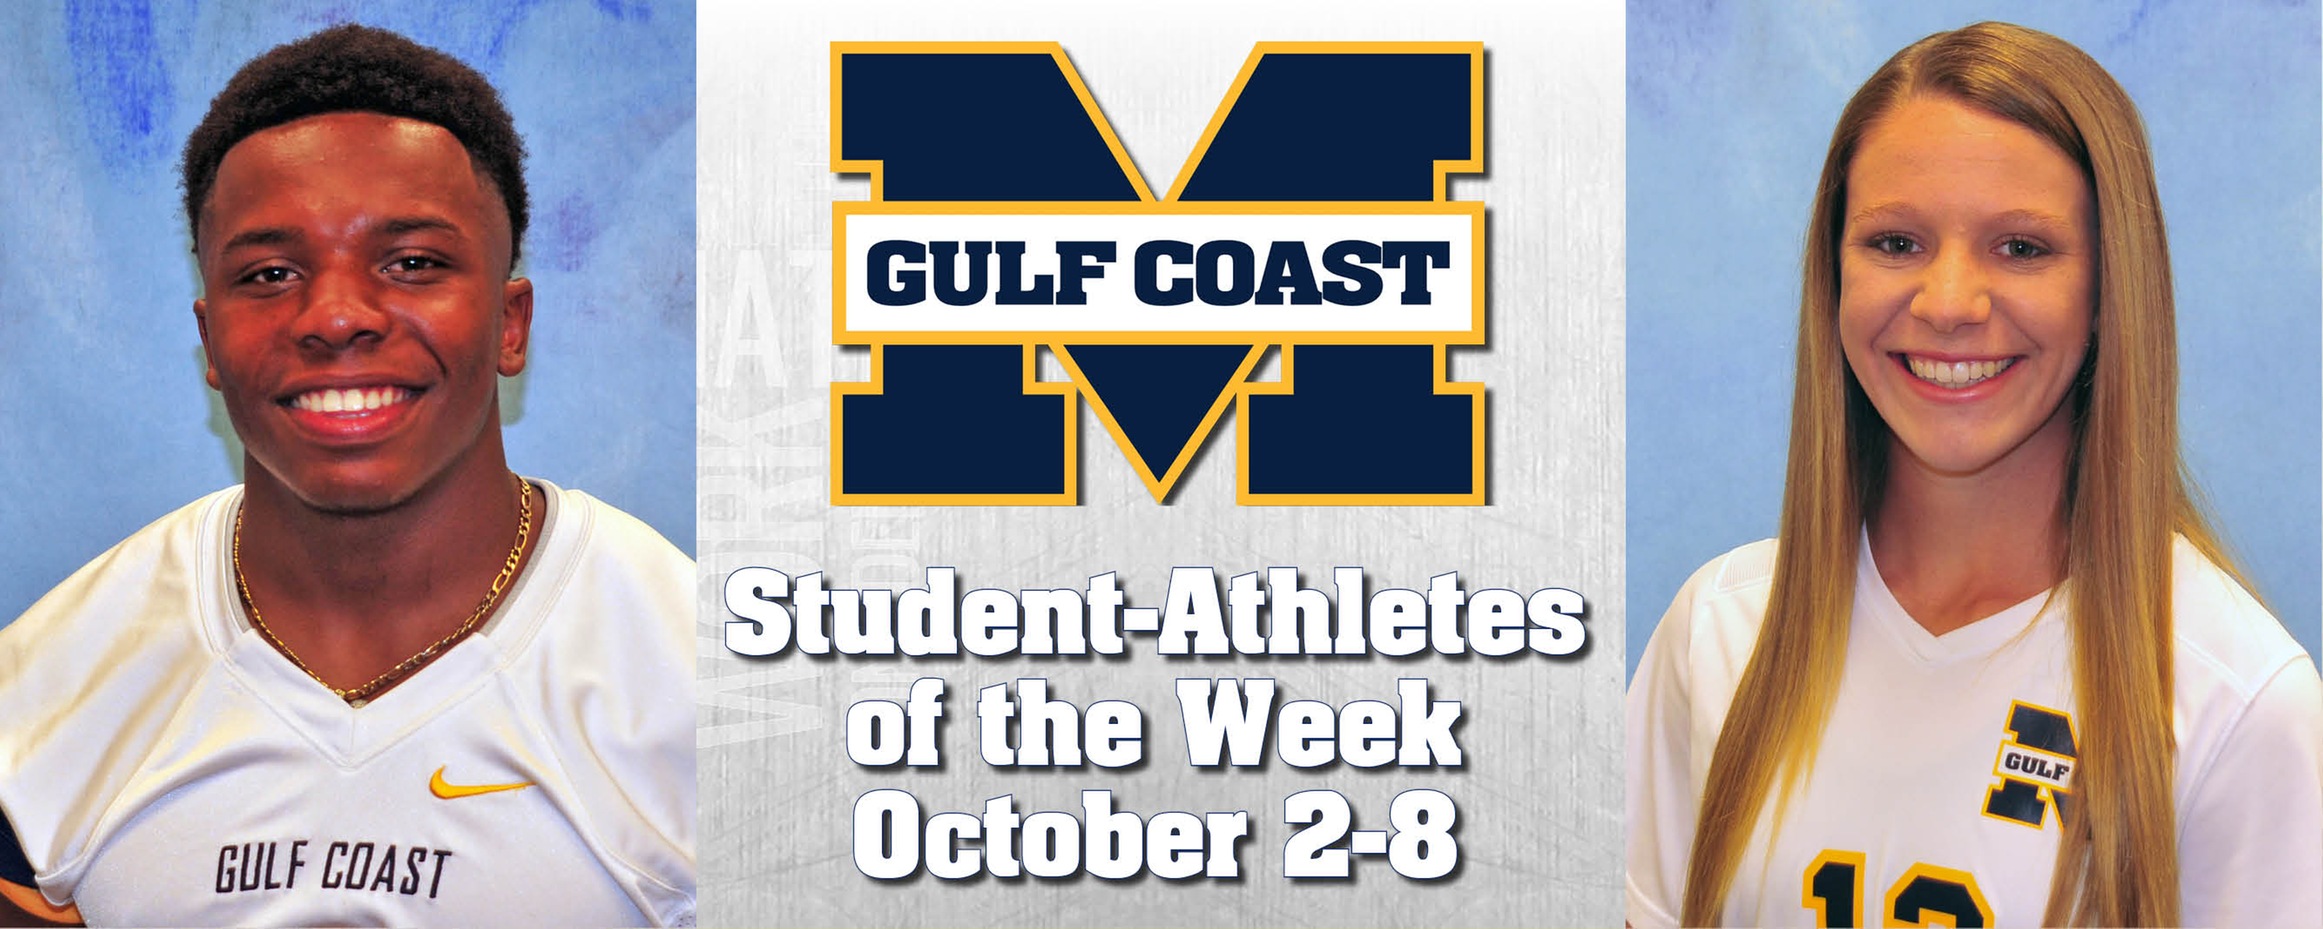 Torrey, LaFontaine named MGCCC Student-Athletes of the Week